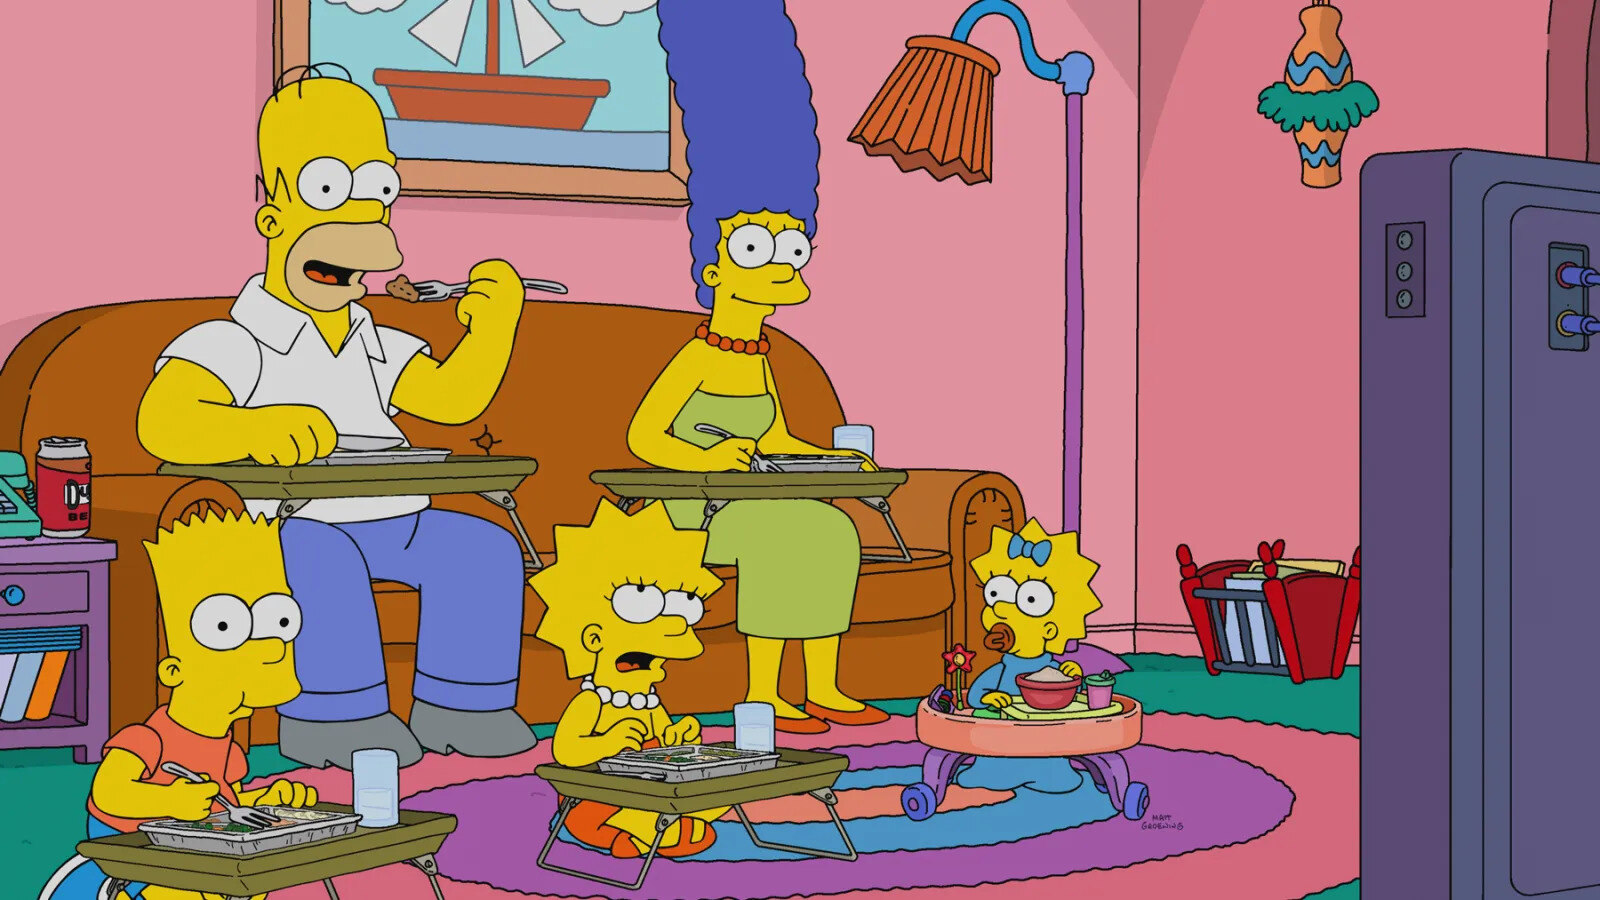 How Long Has “The Simpsons” Been On Television?